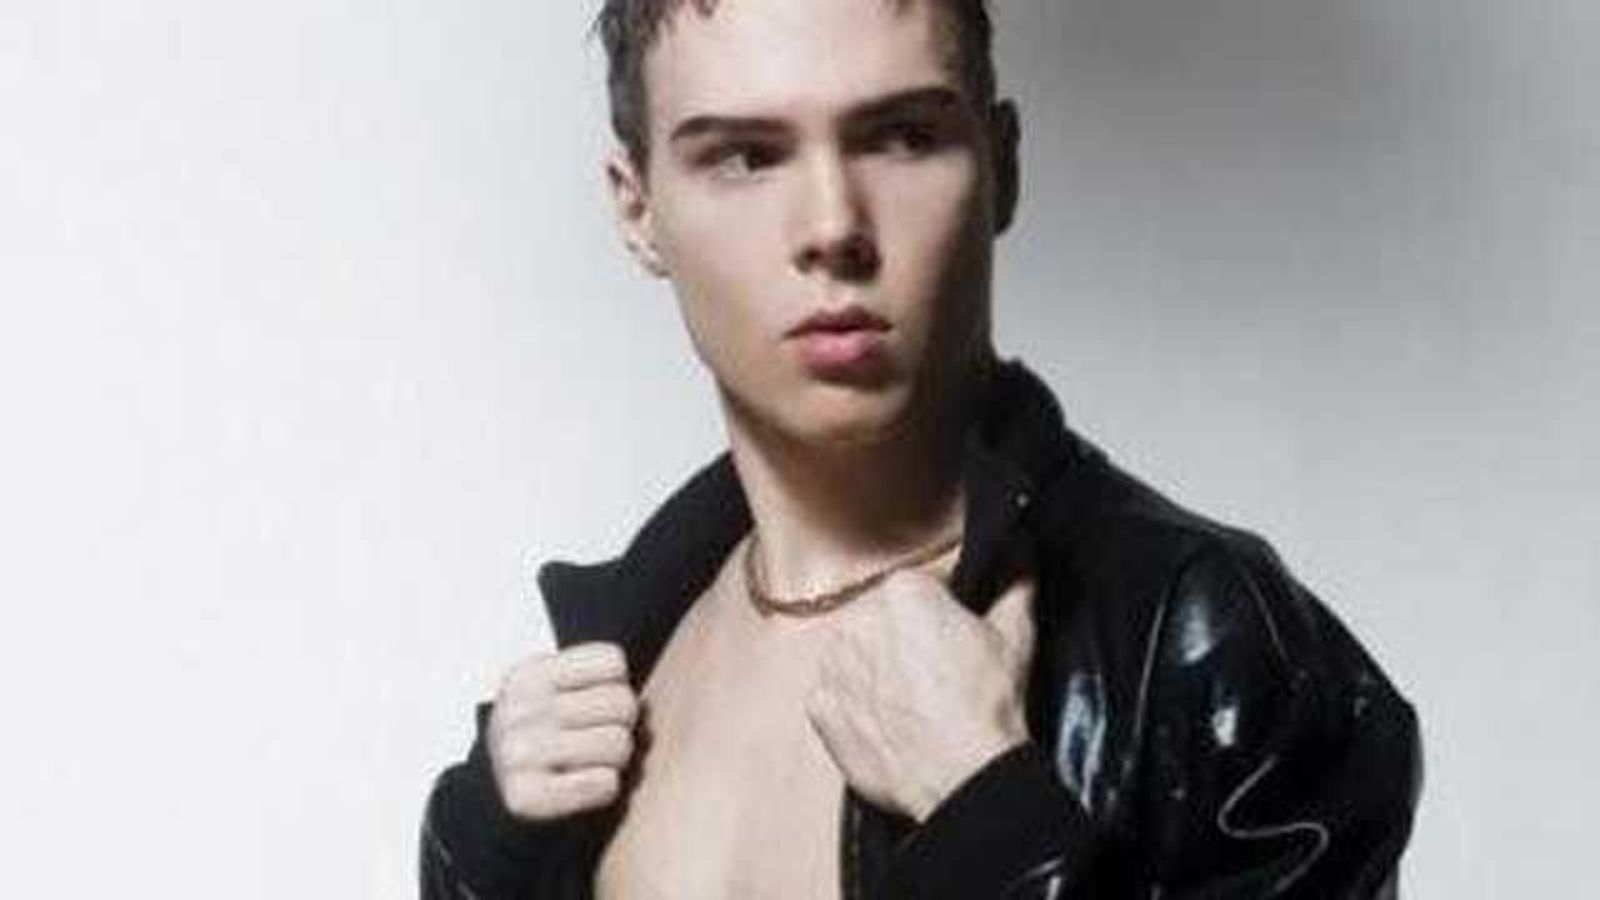 Cannibal Magnotta Gets Life for Dismemberment of Lover